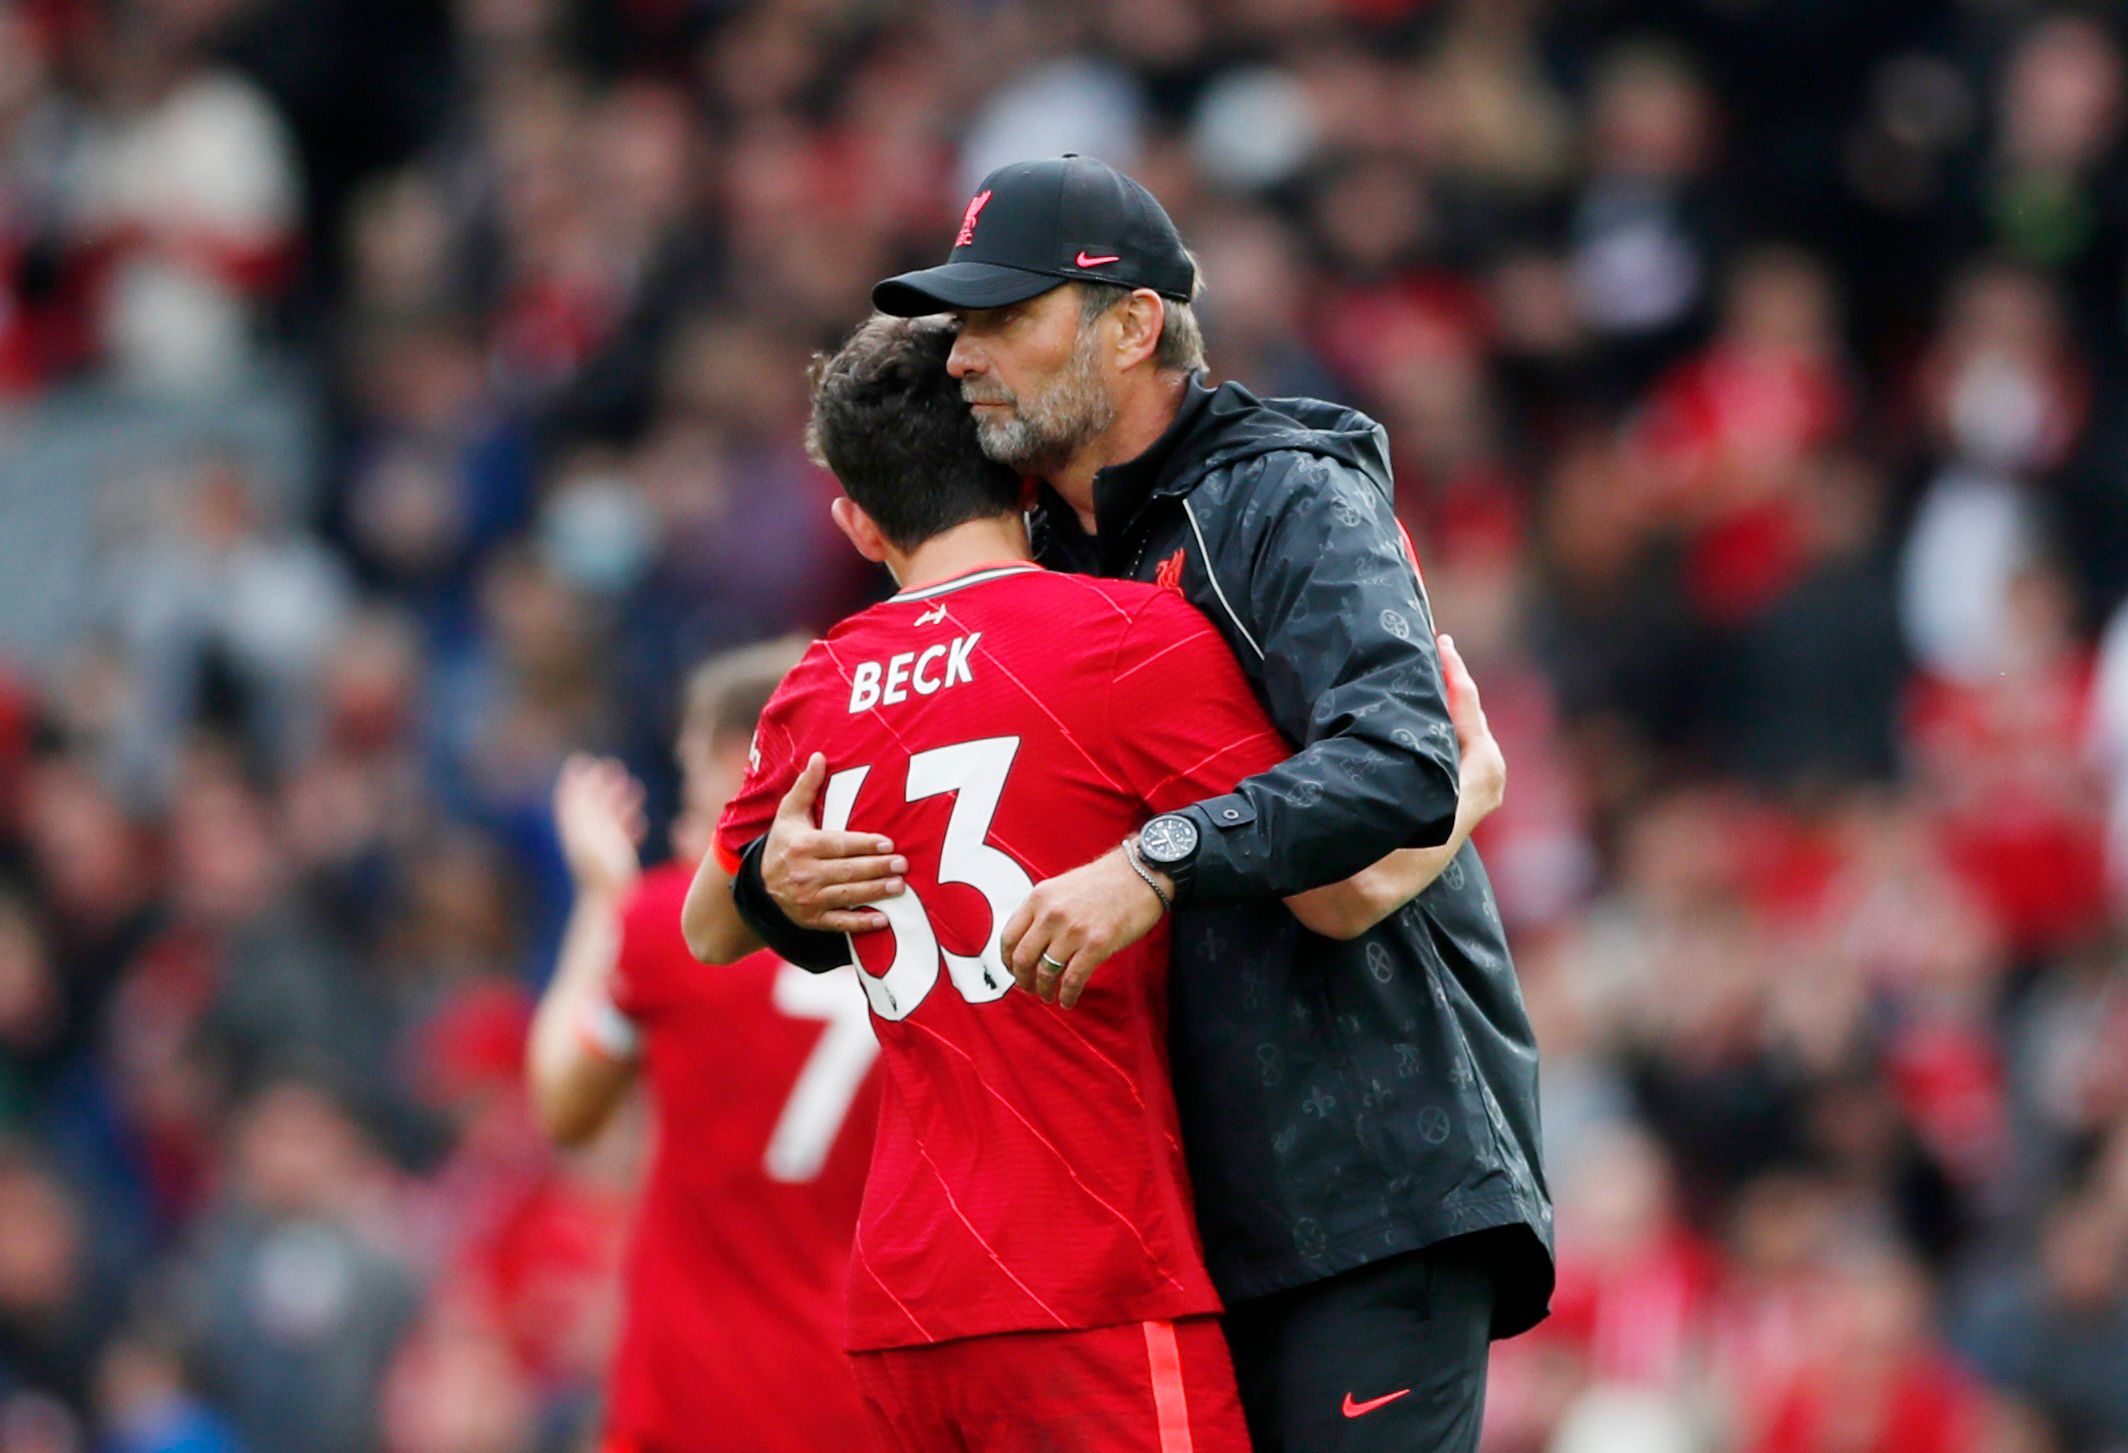 Soccer Football - Pre Season Friendly - Liverpool v Athletic Bilbao - Anfield, Liverpool, Britain - August 8, 2021  Liverpool manager Jurgen Klopp with Owen Beck after the match Action Images via Reuters/Lee Smith